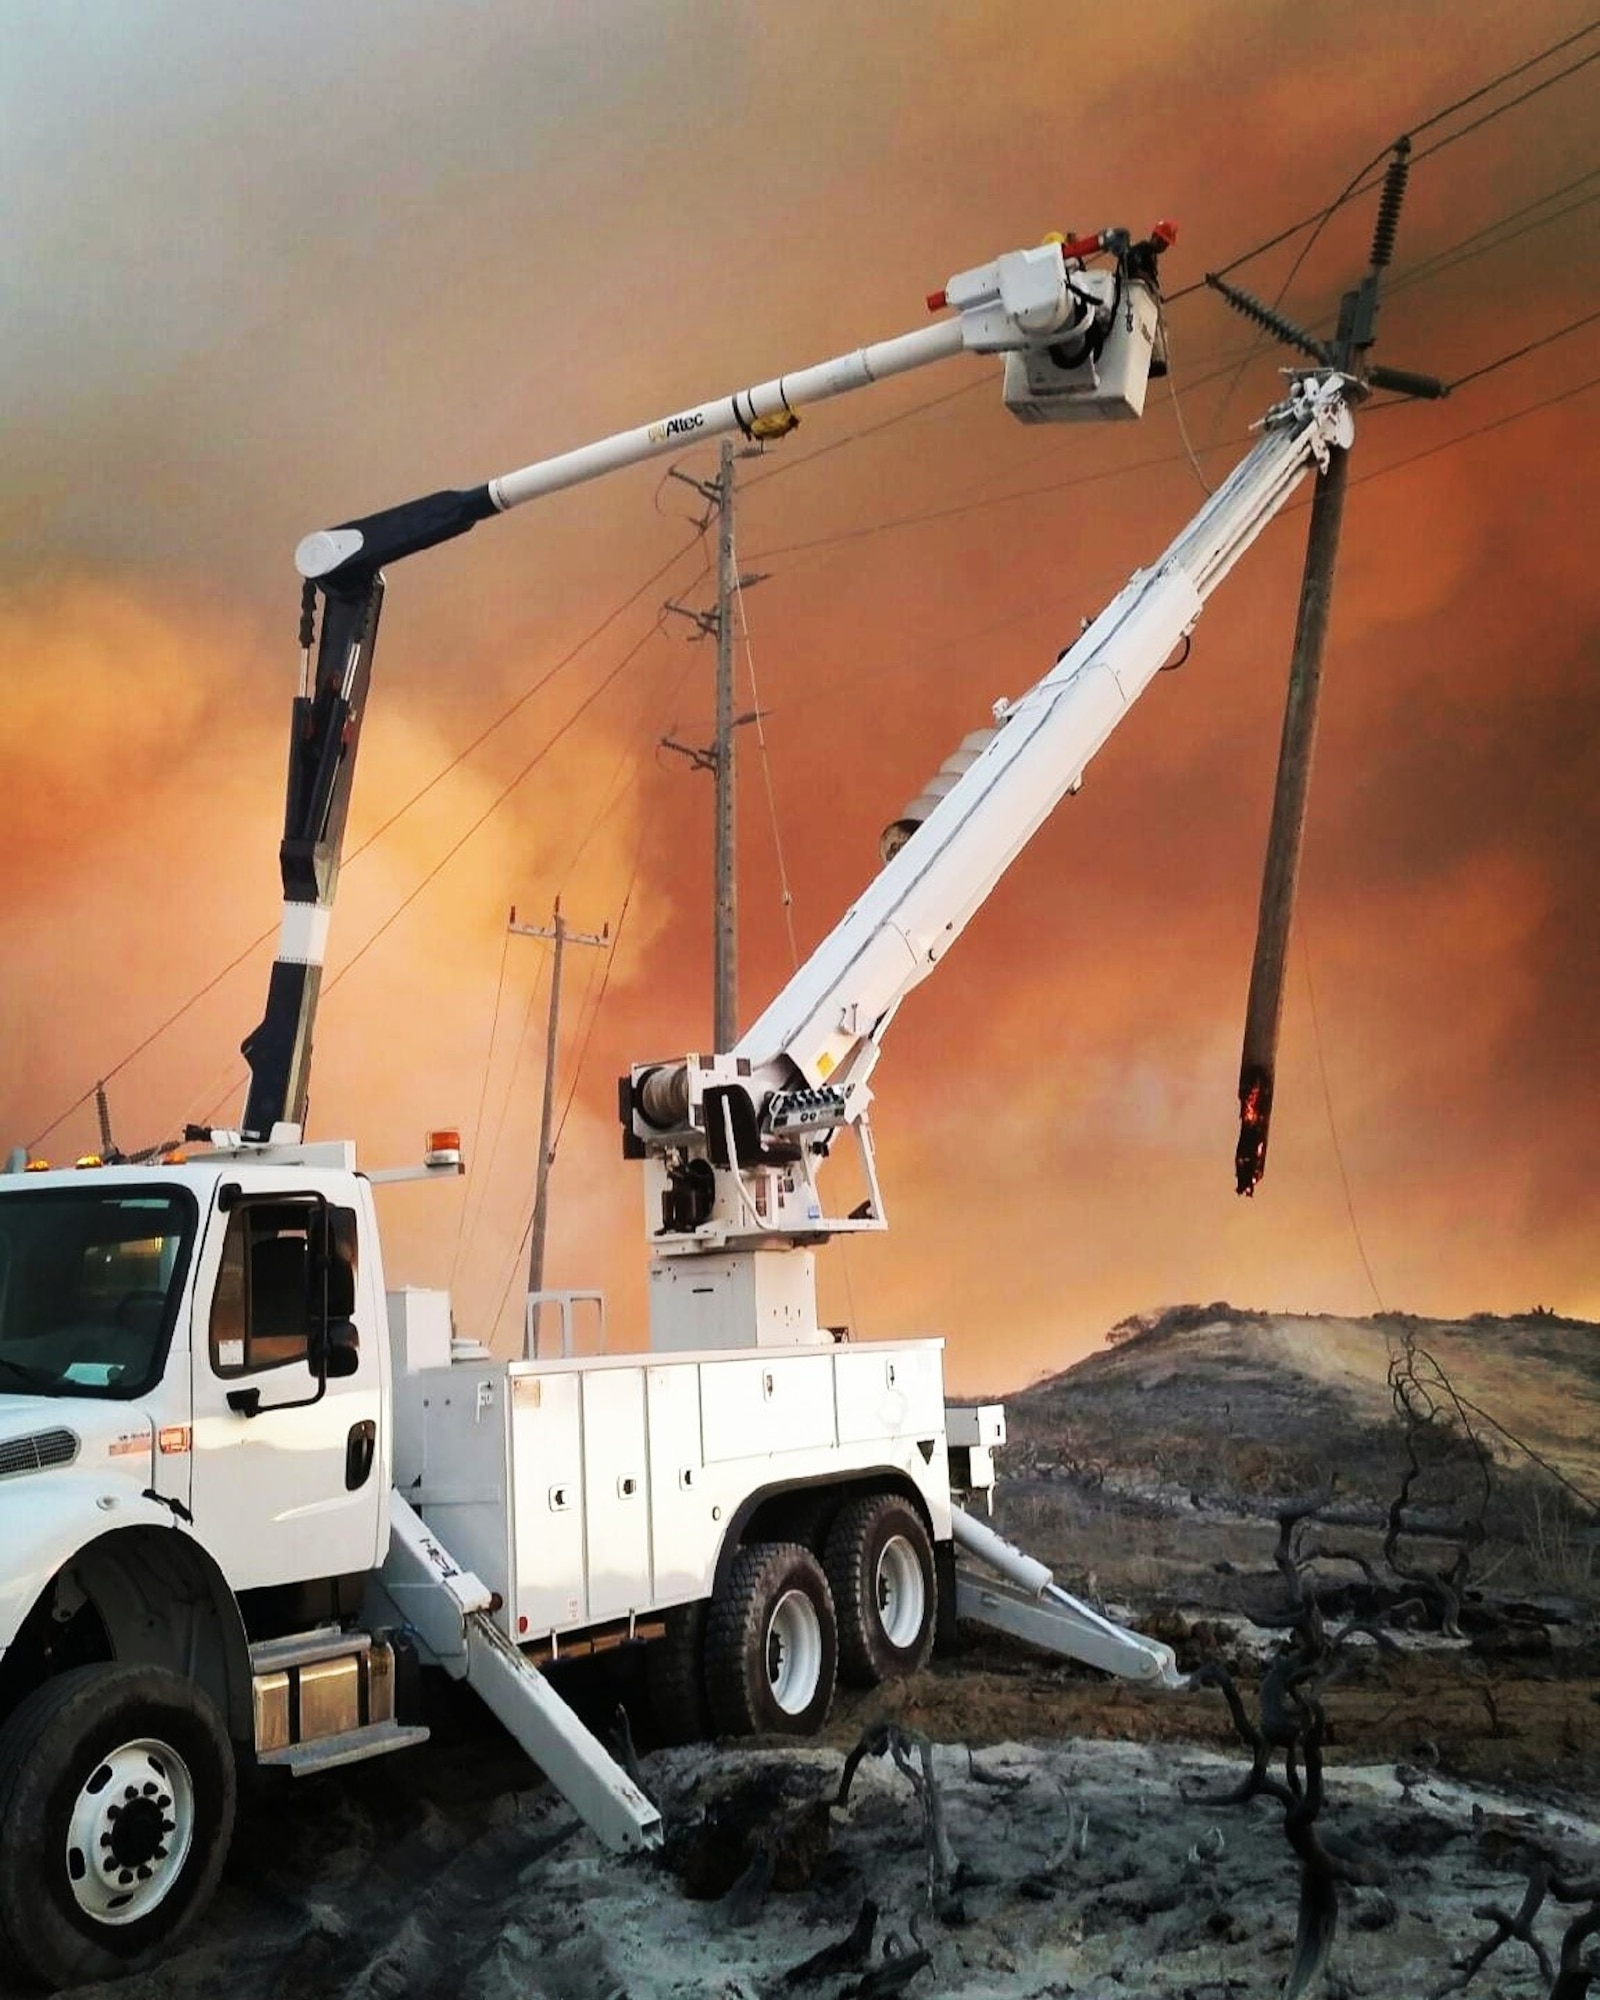 Electricians work to deengage power after a fire swept through portions of South Base, Sept. 19, 2016, Vandenberg Air Force Base, Calif. Vandenberg personnel, alongside community partners and a specialized incident management team, have worked to extinguish five separate wildland fires, here, since Sept. 17. (U.S. Air Force photo by Senior Airman Keith Martineau/Released)